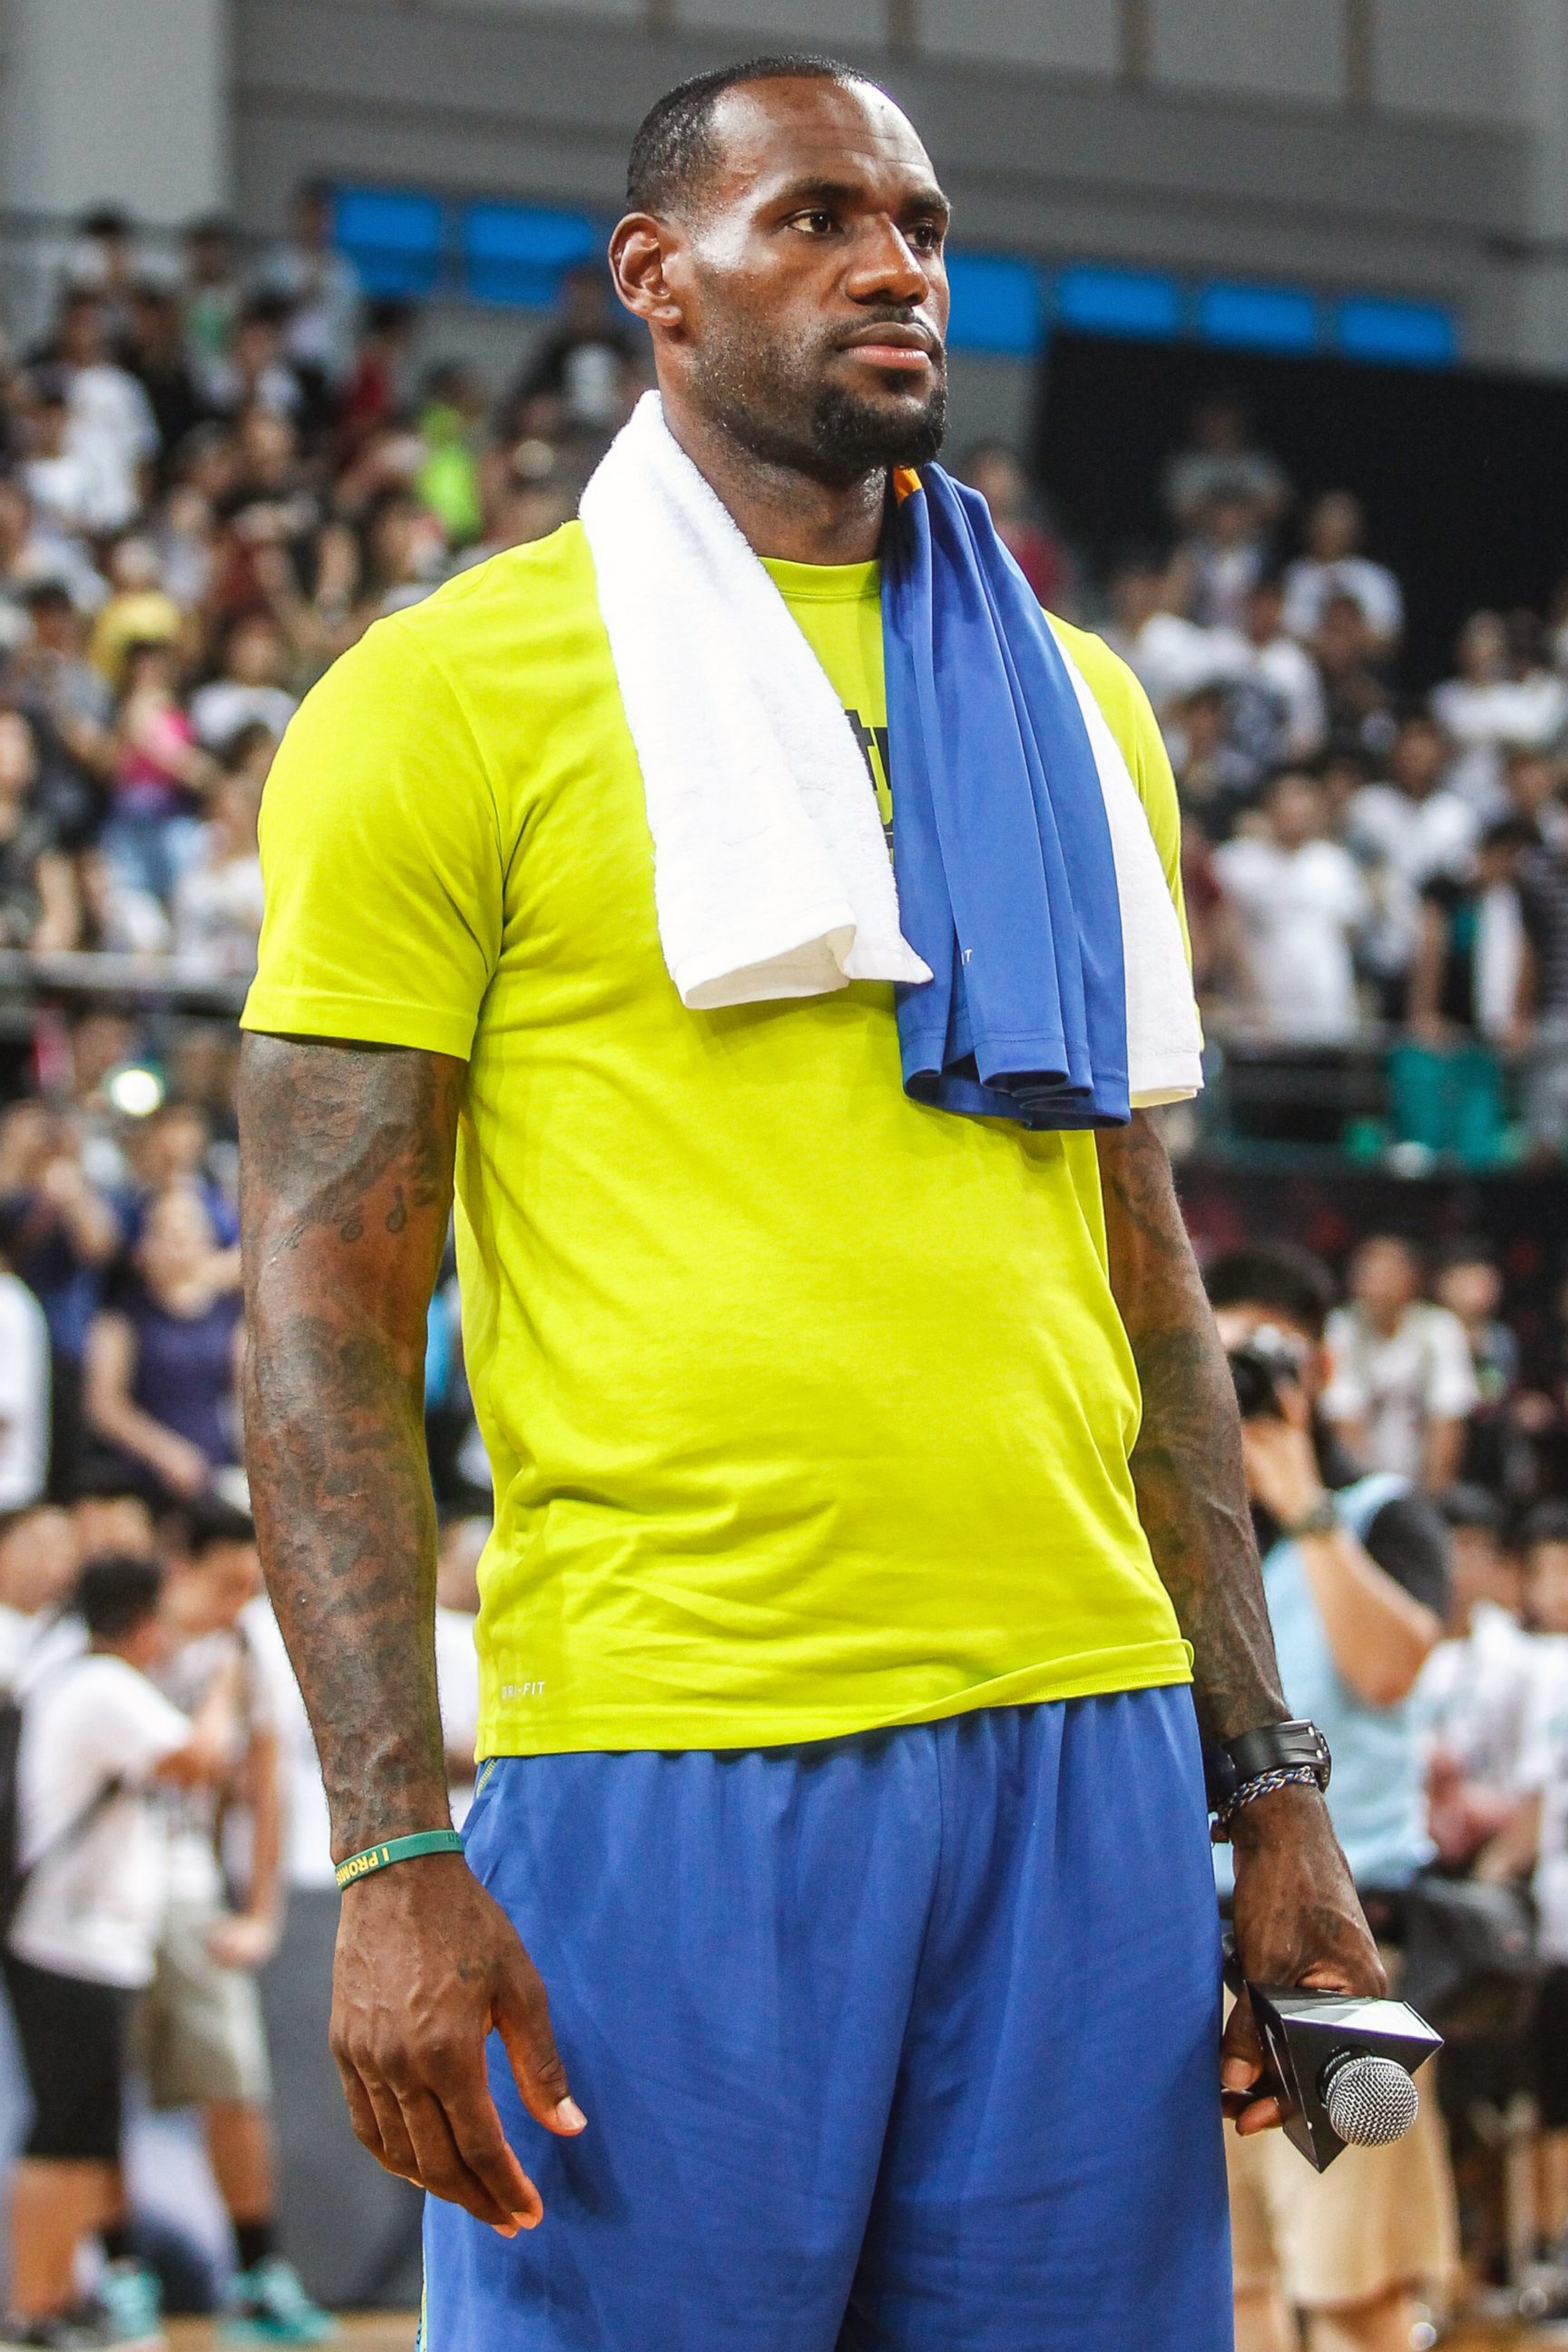 PHOTO: LeBron James of the Cleveland Cavaliers meets fans at Guangzhou Sport University, July 22, 2014, in Guangzhou, China.